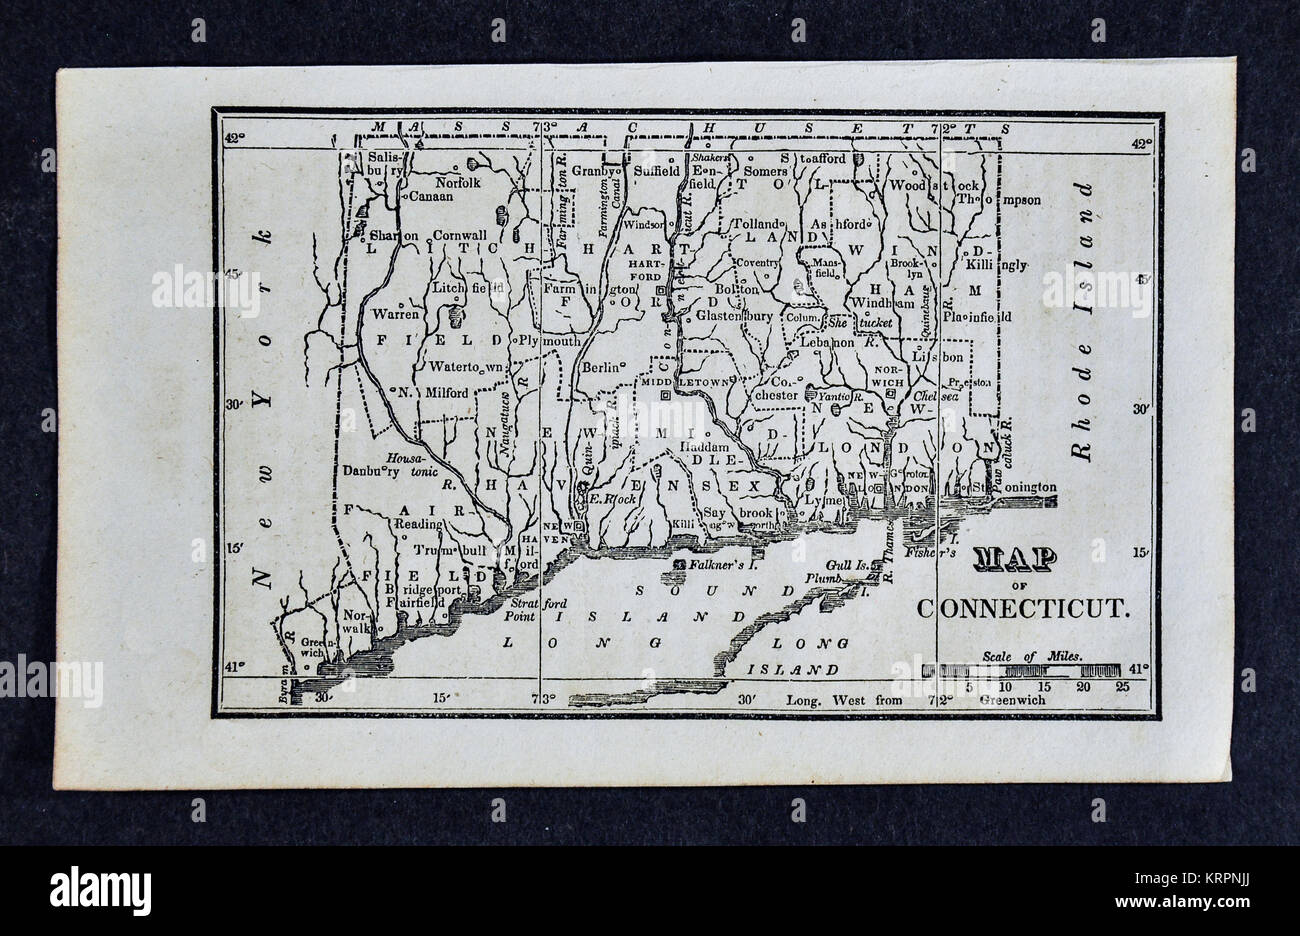 1830 Nathan Hale Map - Connecticut - Hartford New Haven Bridgeport - United States Stock Photo